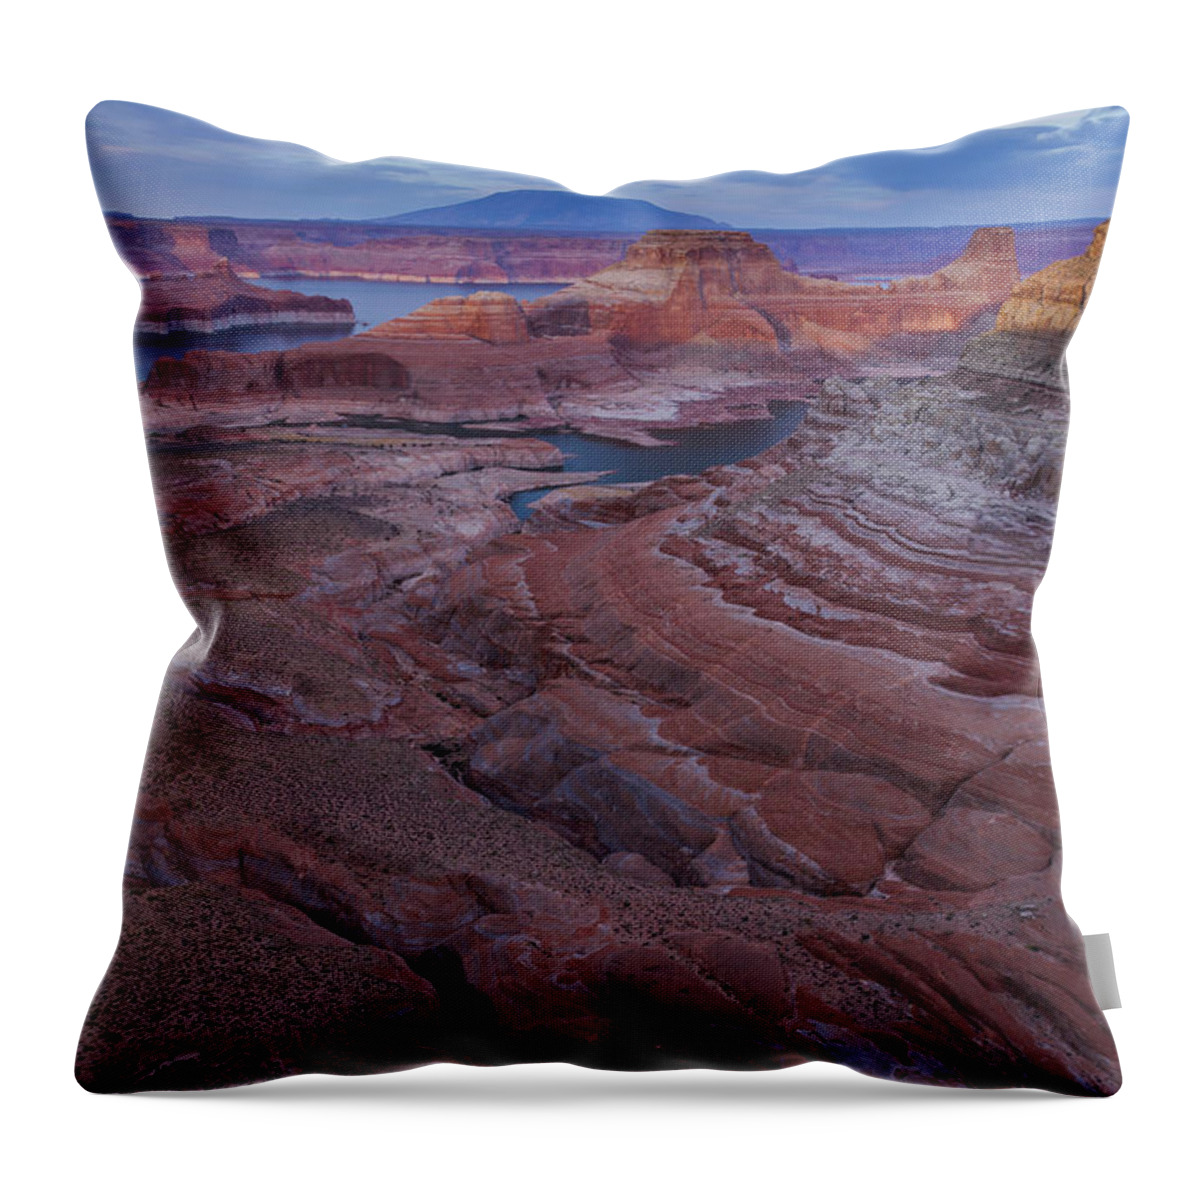 Tranquility Throw Pillow featuring the photograph Sand Stone Rock Formation In Sw Usa #7 by Gavriel Jecan